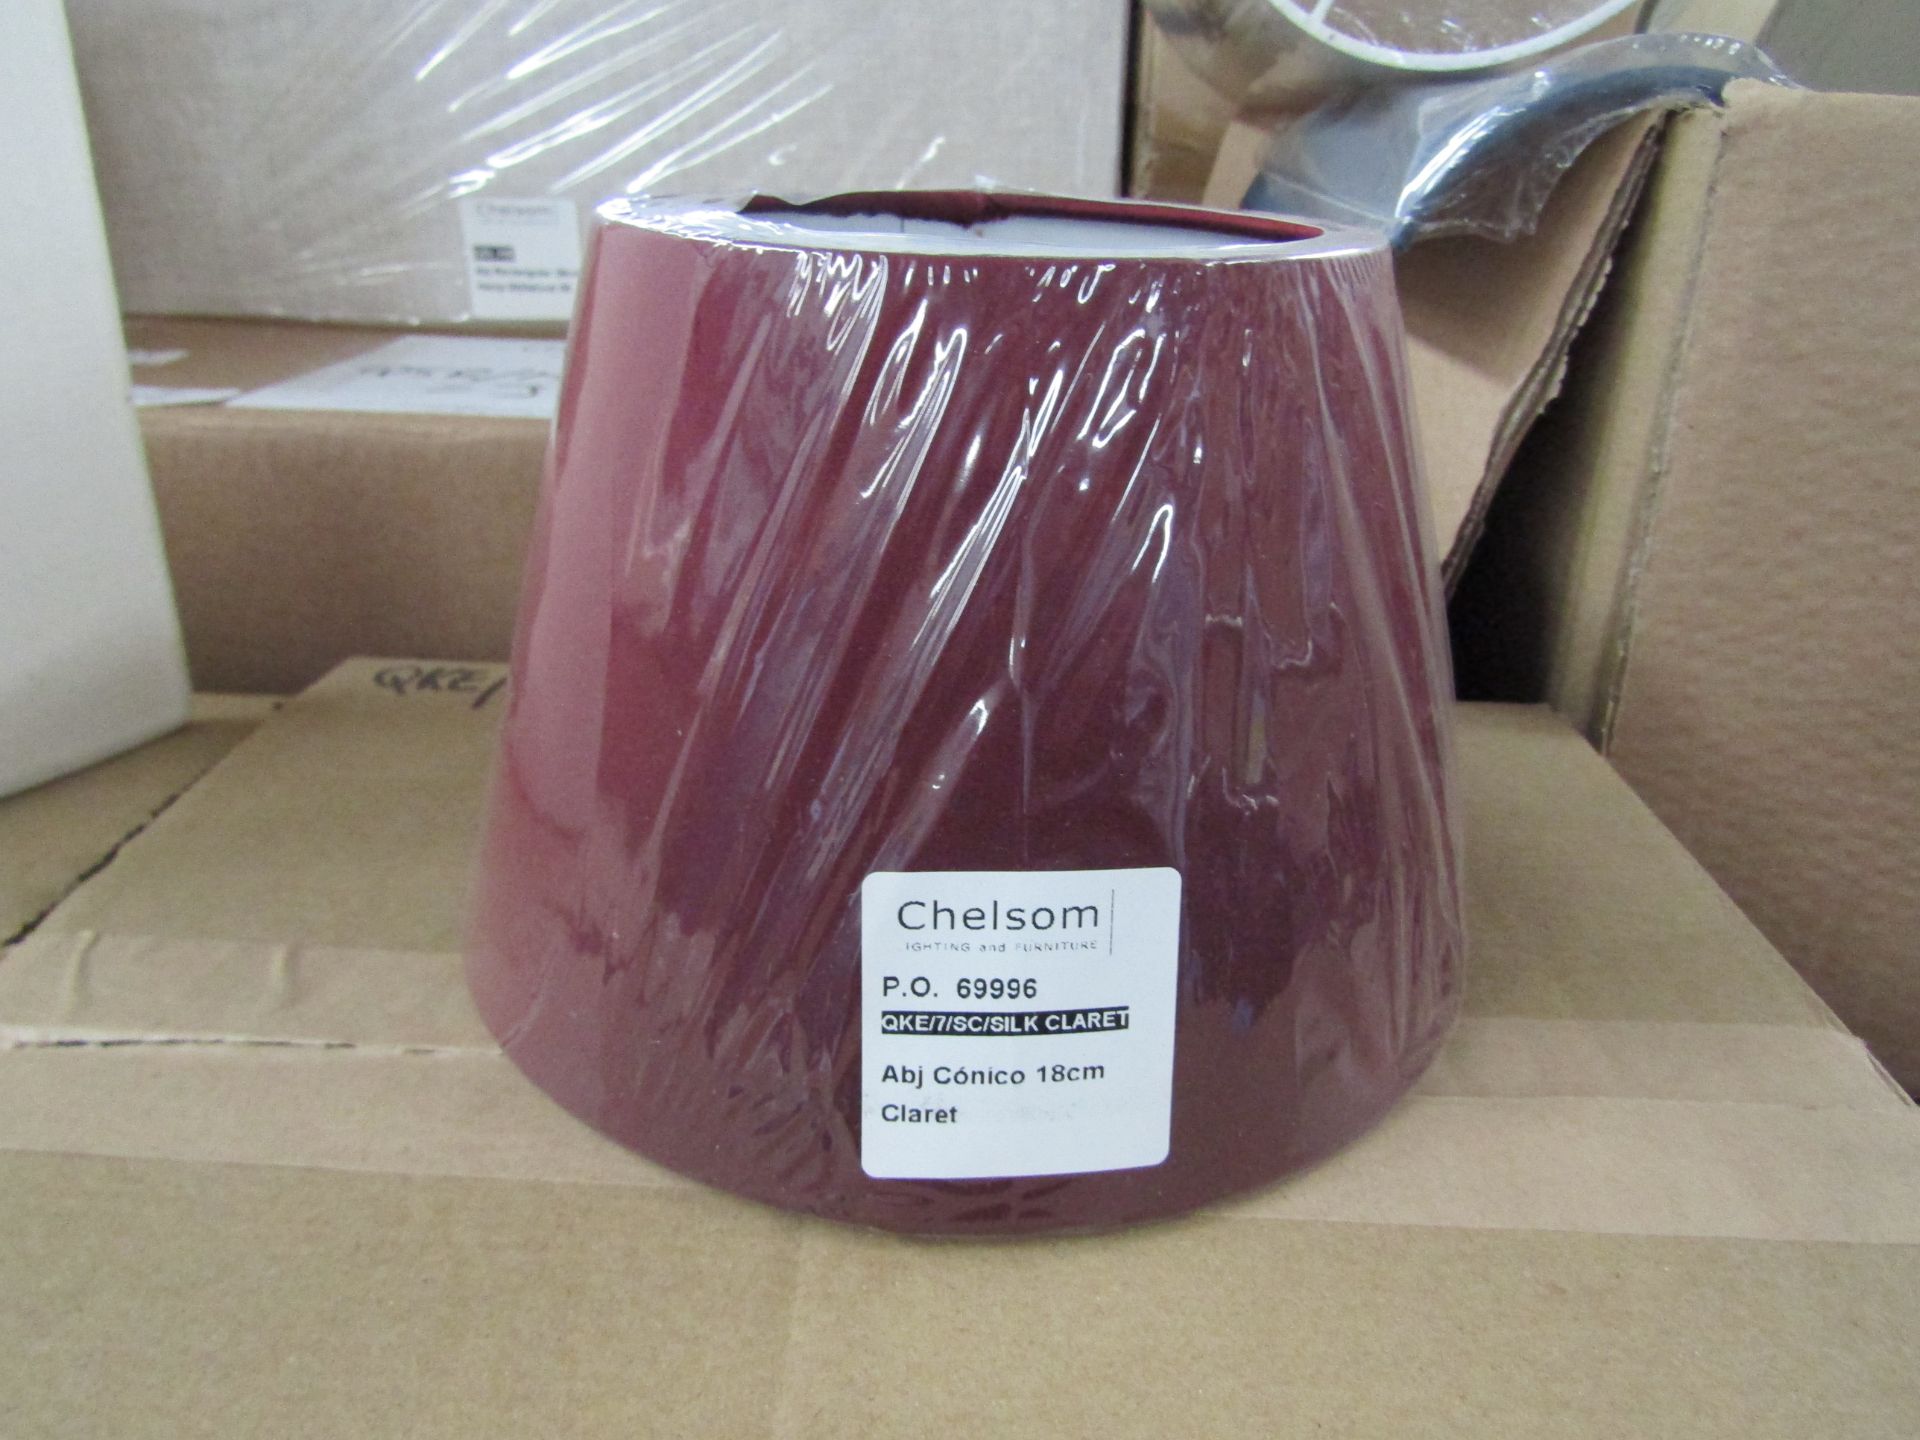 Box Of 13x Chelsom 18cm Claret Shade - Unused & Boxed.